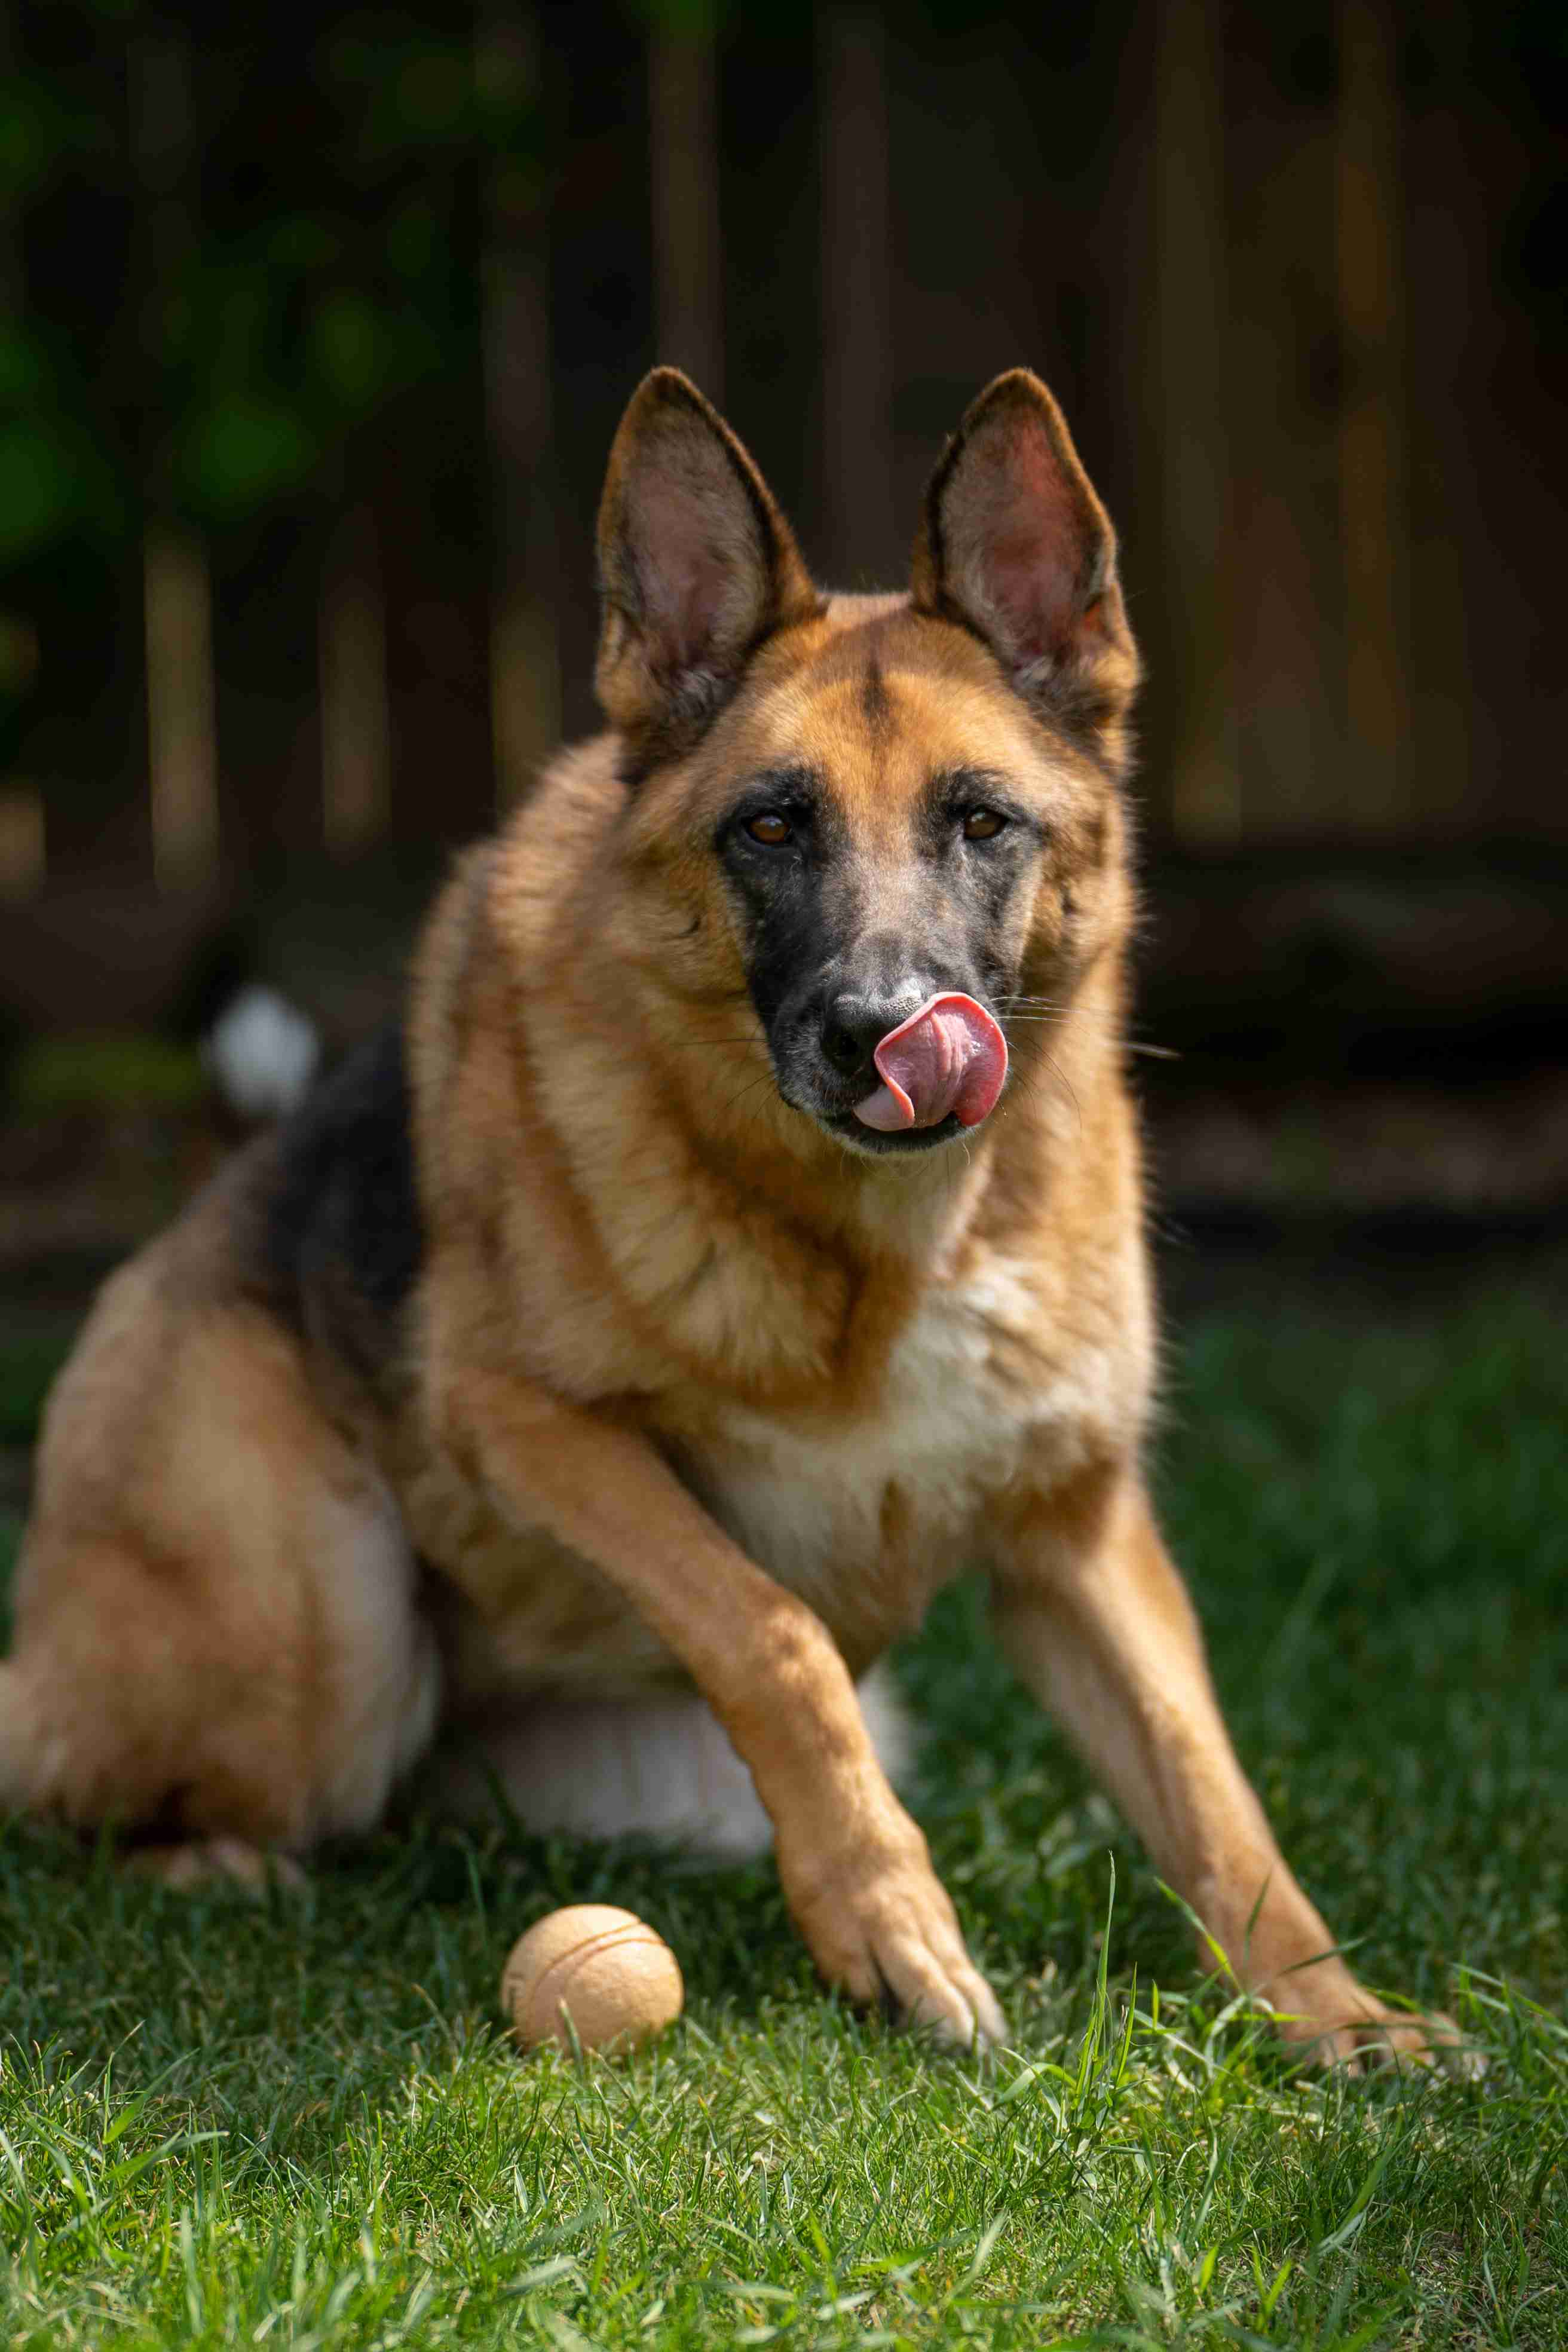 What is the best way to prevent resource guarding in a German shepherd?